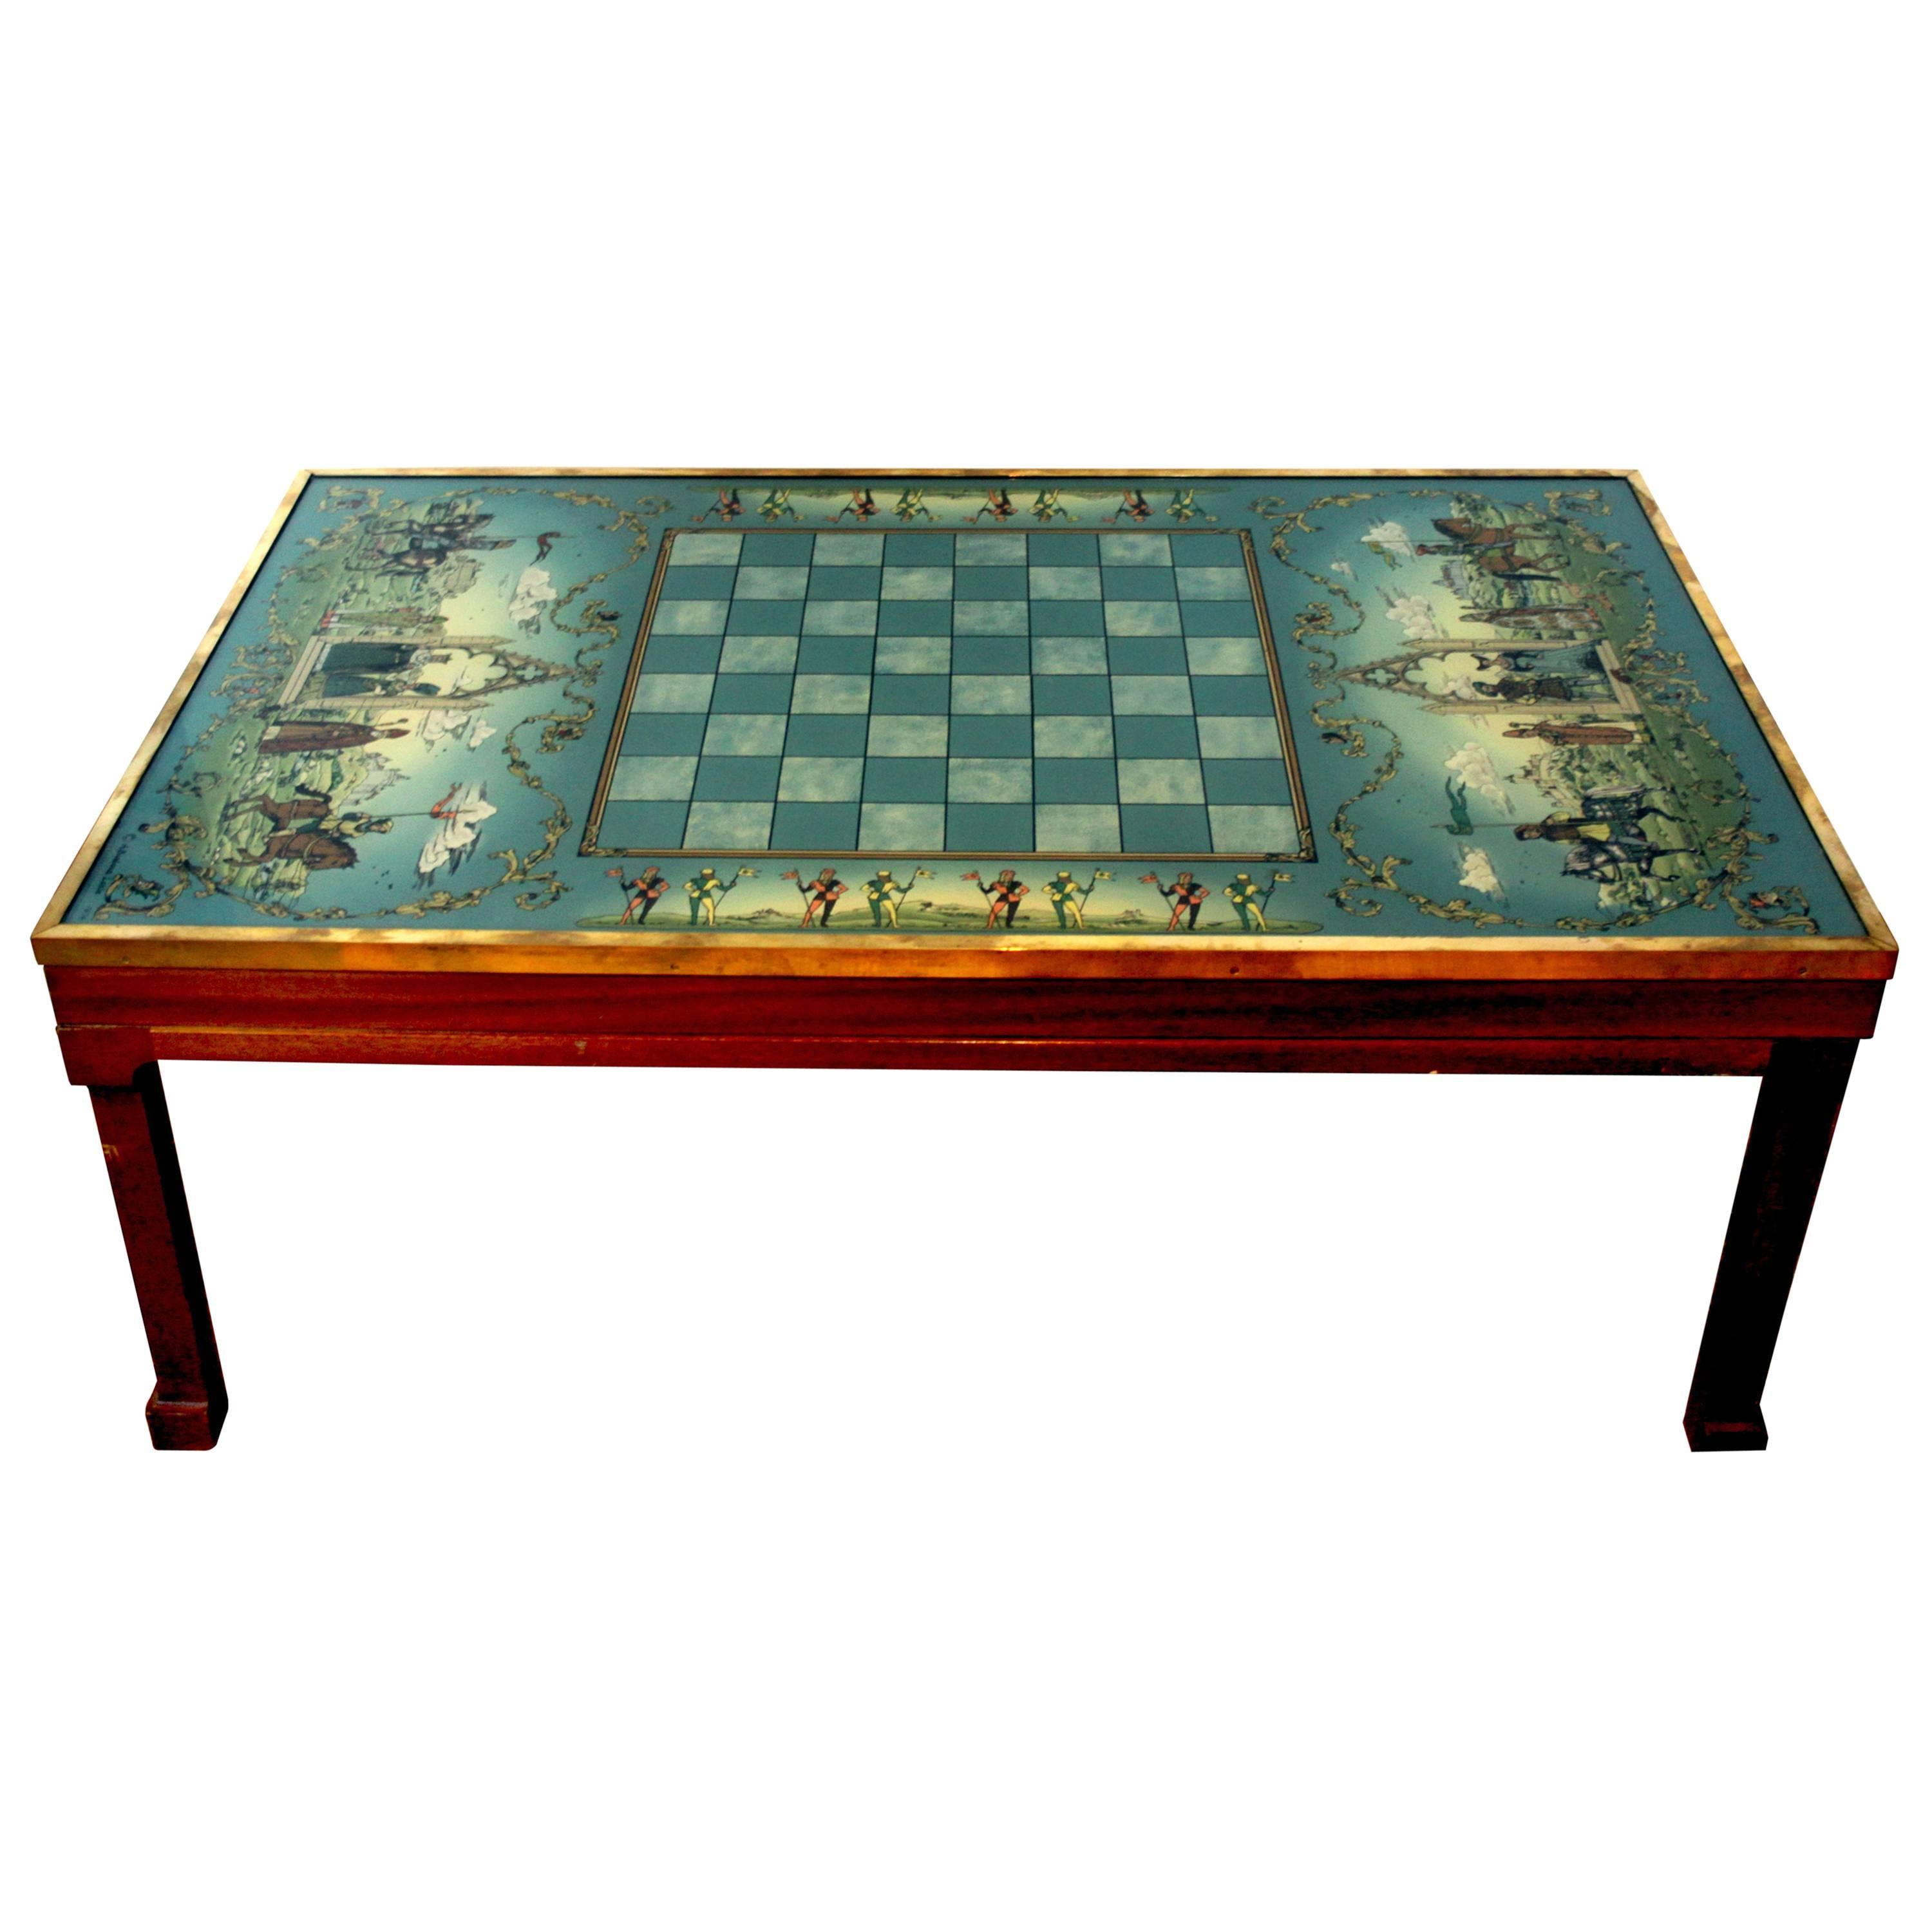 British Reverse-Painted Glass Chess Table